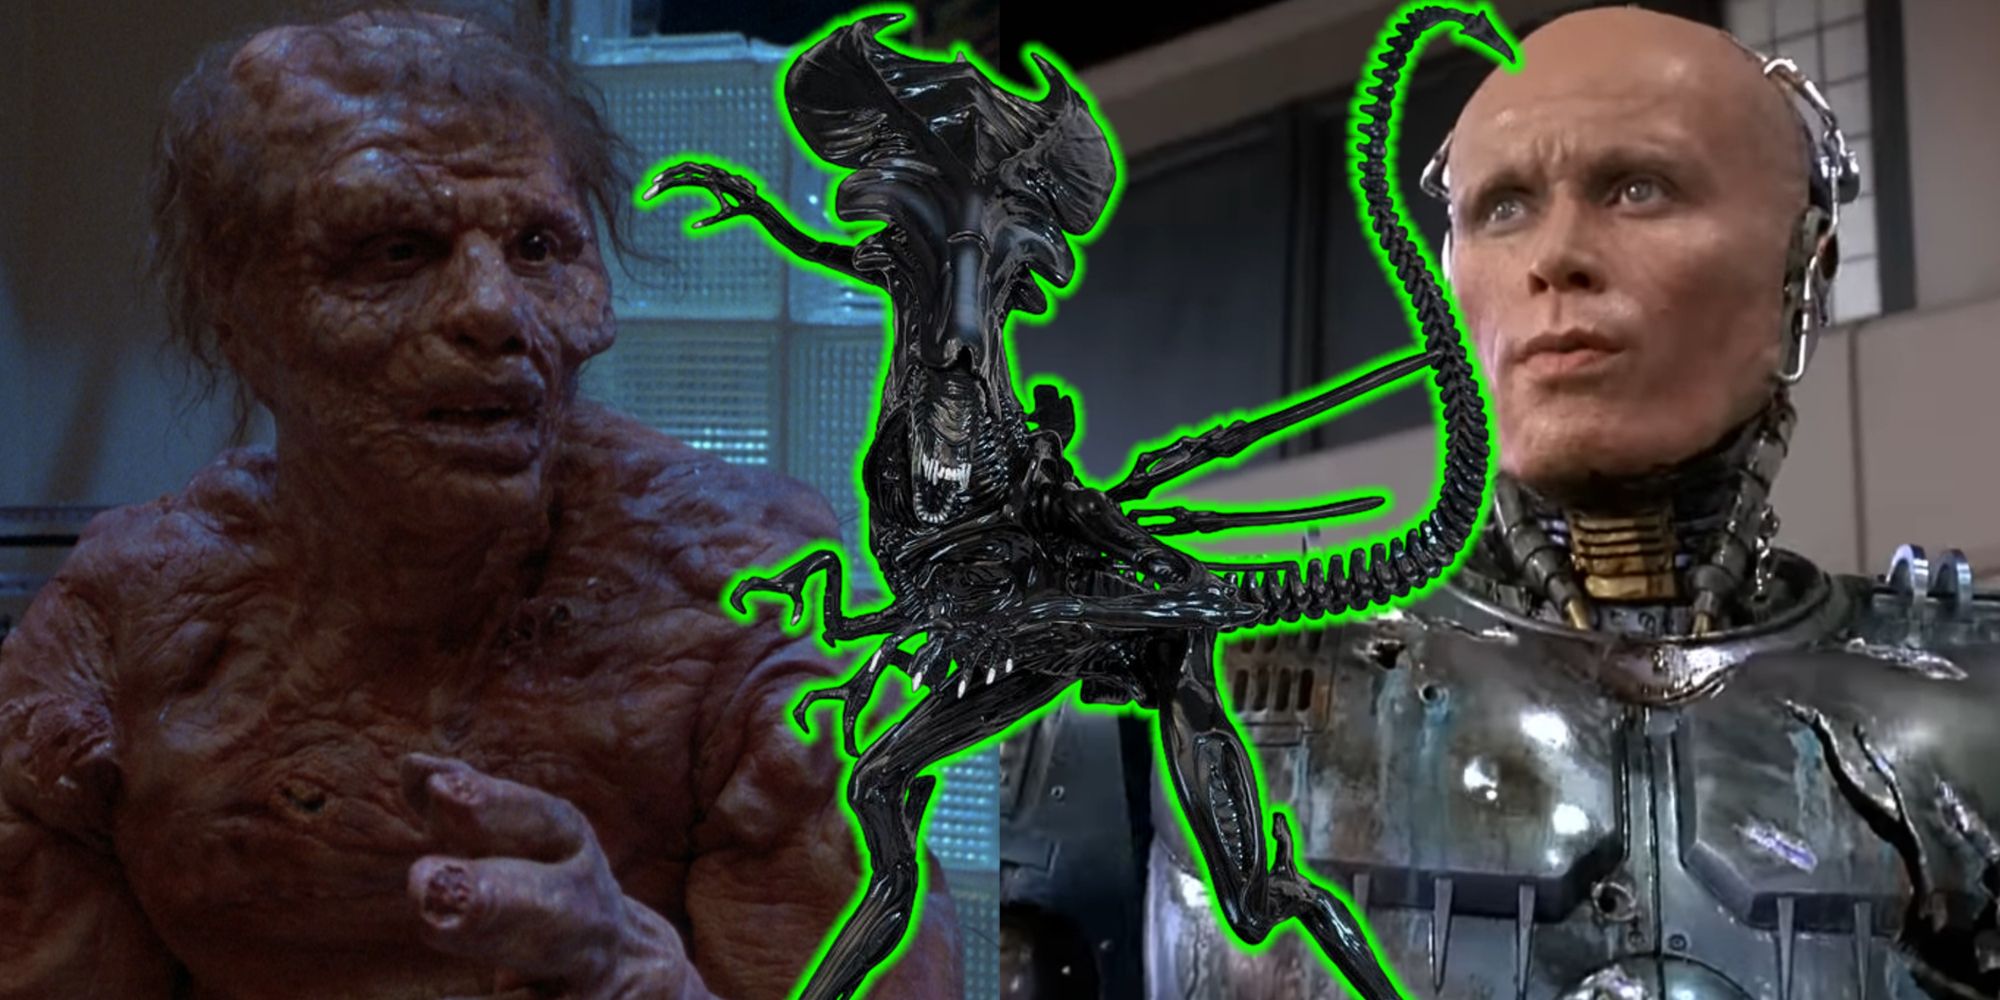 Split image of Brundlefly, RoboCop, and a Xenomorph Queen in '80s movies